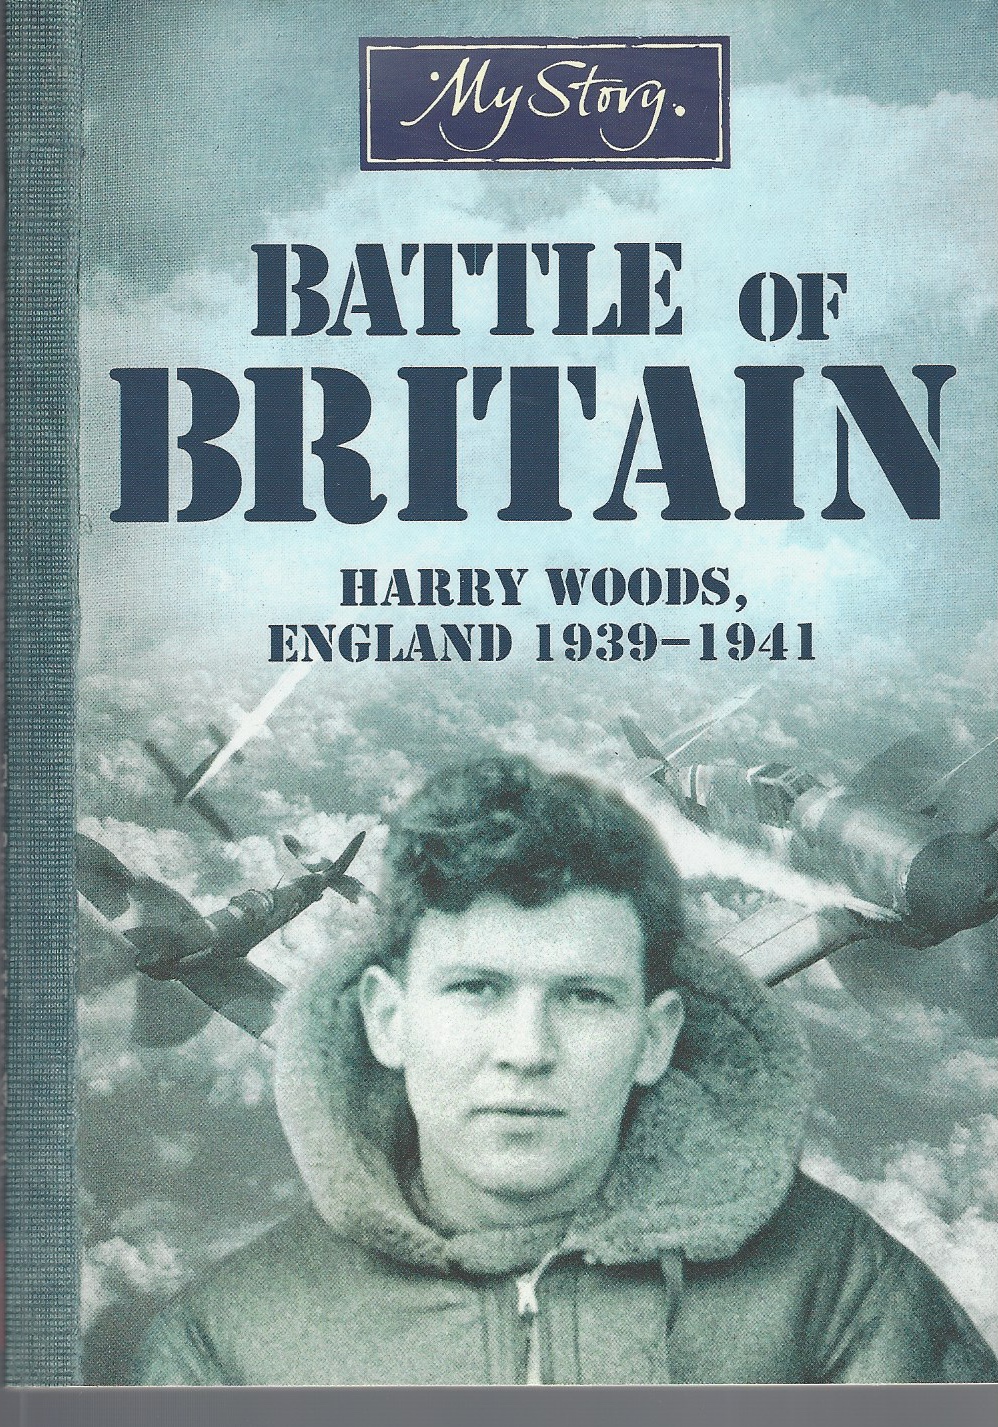 PRIESTLEY, CHRIS - My Story the Battle of Britain: Harry Woods, England 1939-1941